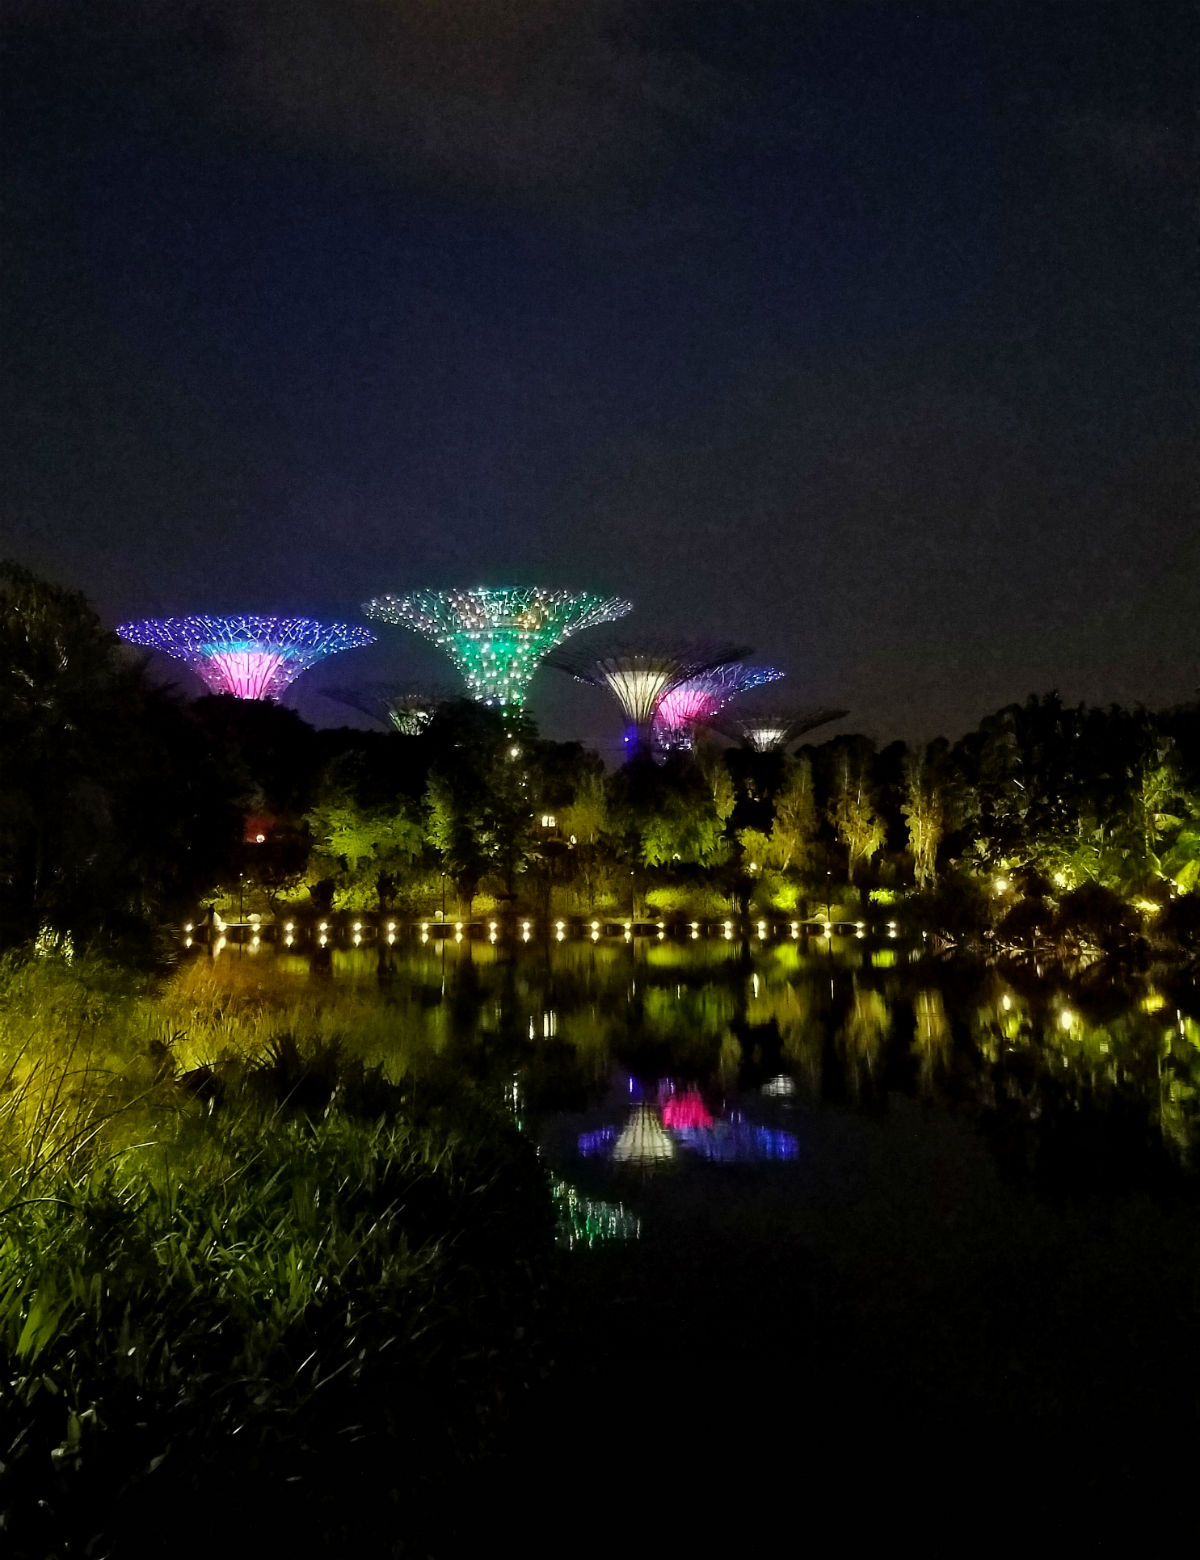 48 hour Singapore travel itinerary: Gardens by the Bay